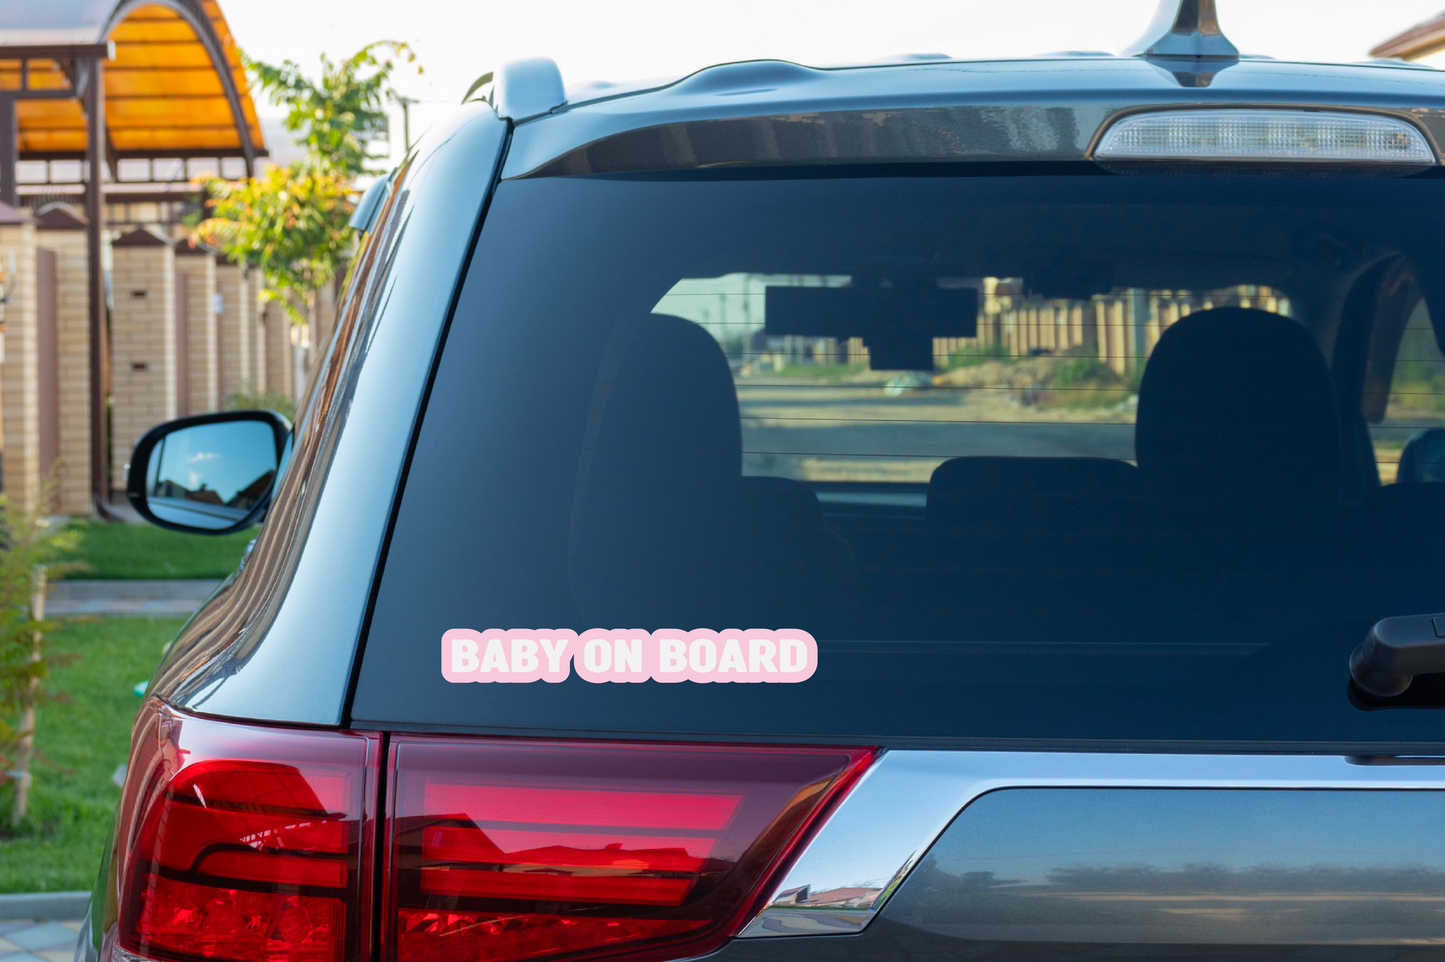 "Pastels" Baby on board decal